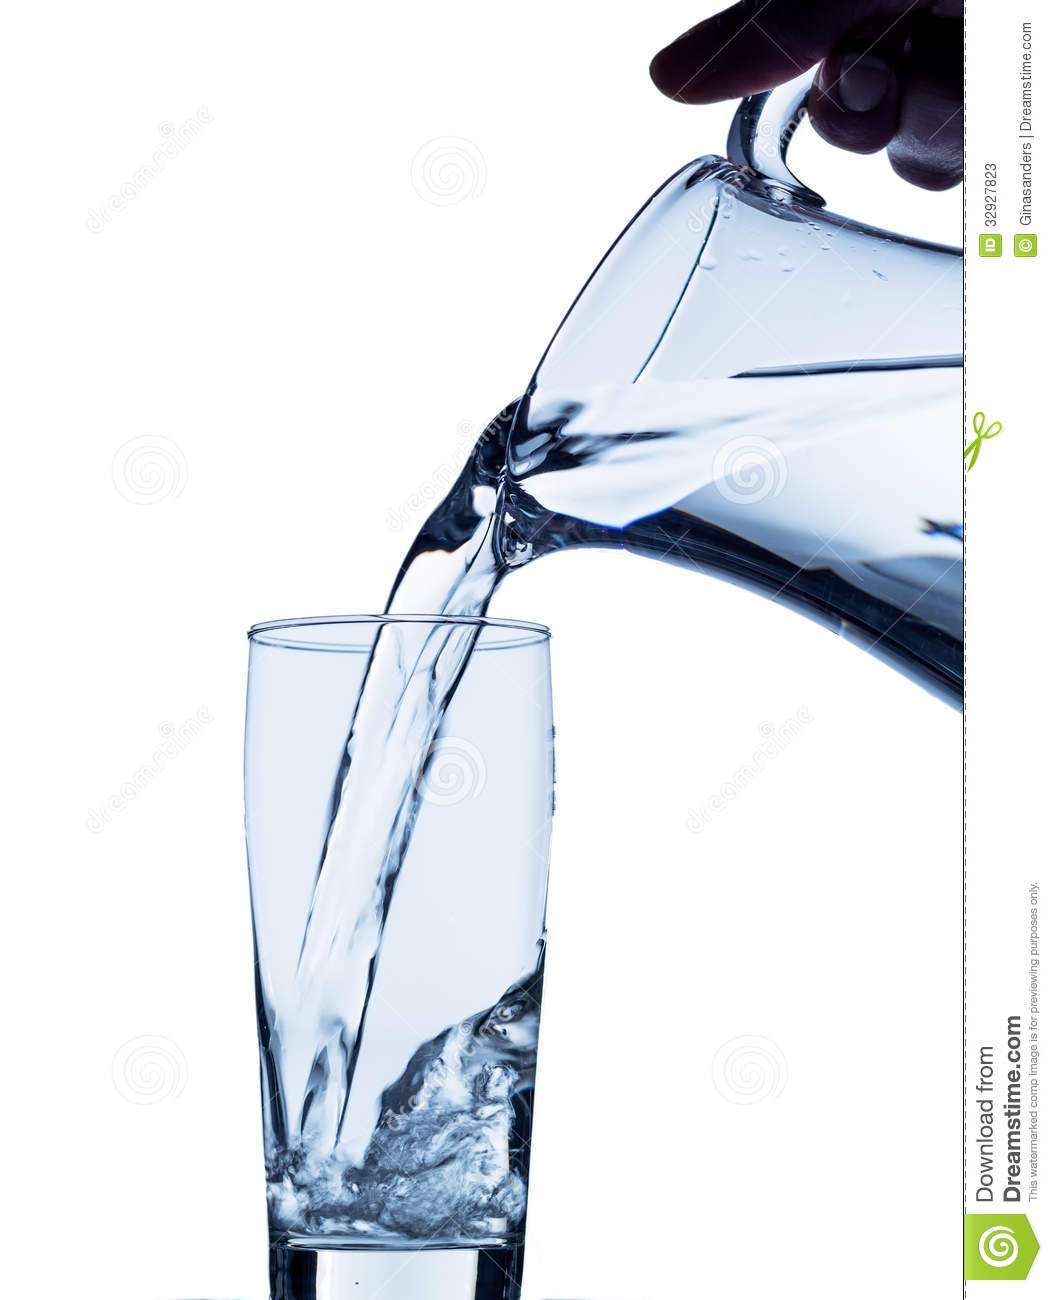 Pure Water Is Emptied Into A Glass Of Water From A Pitcher  Fresh